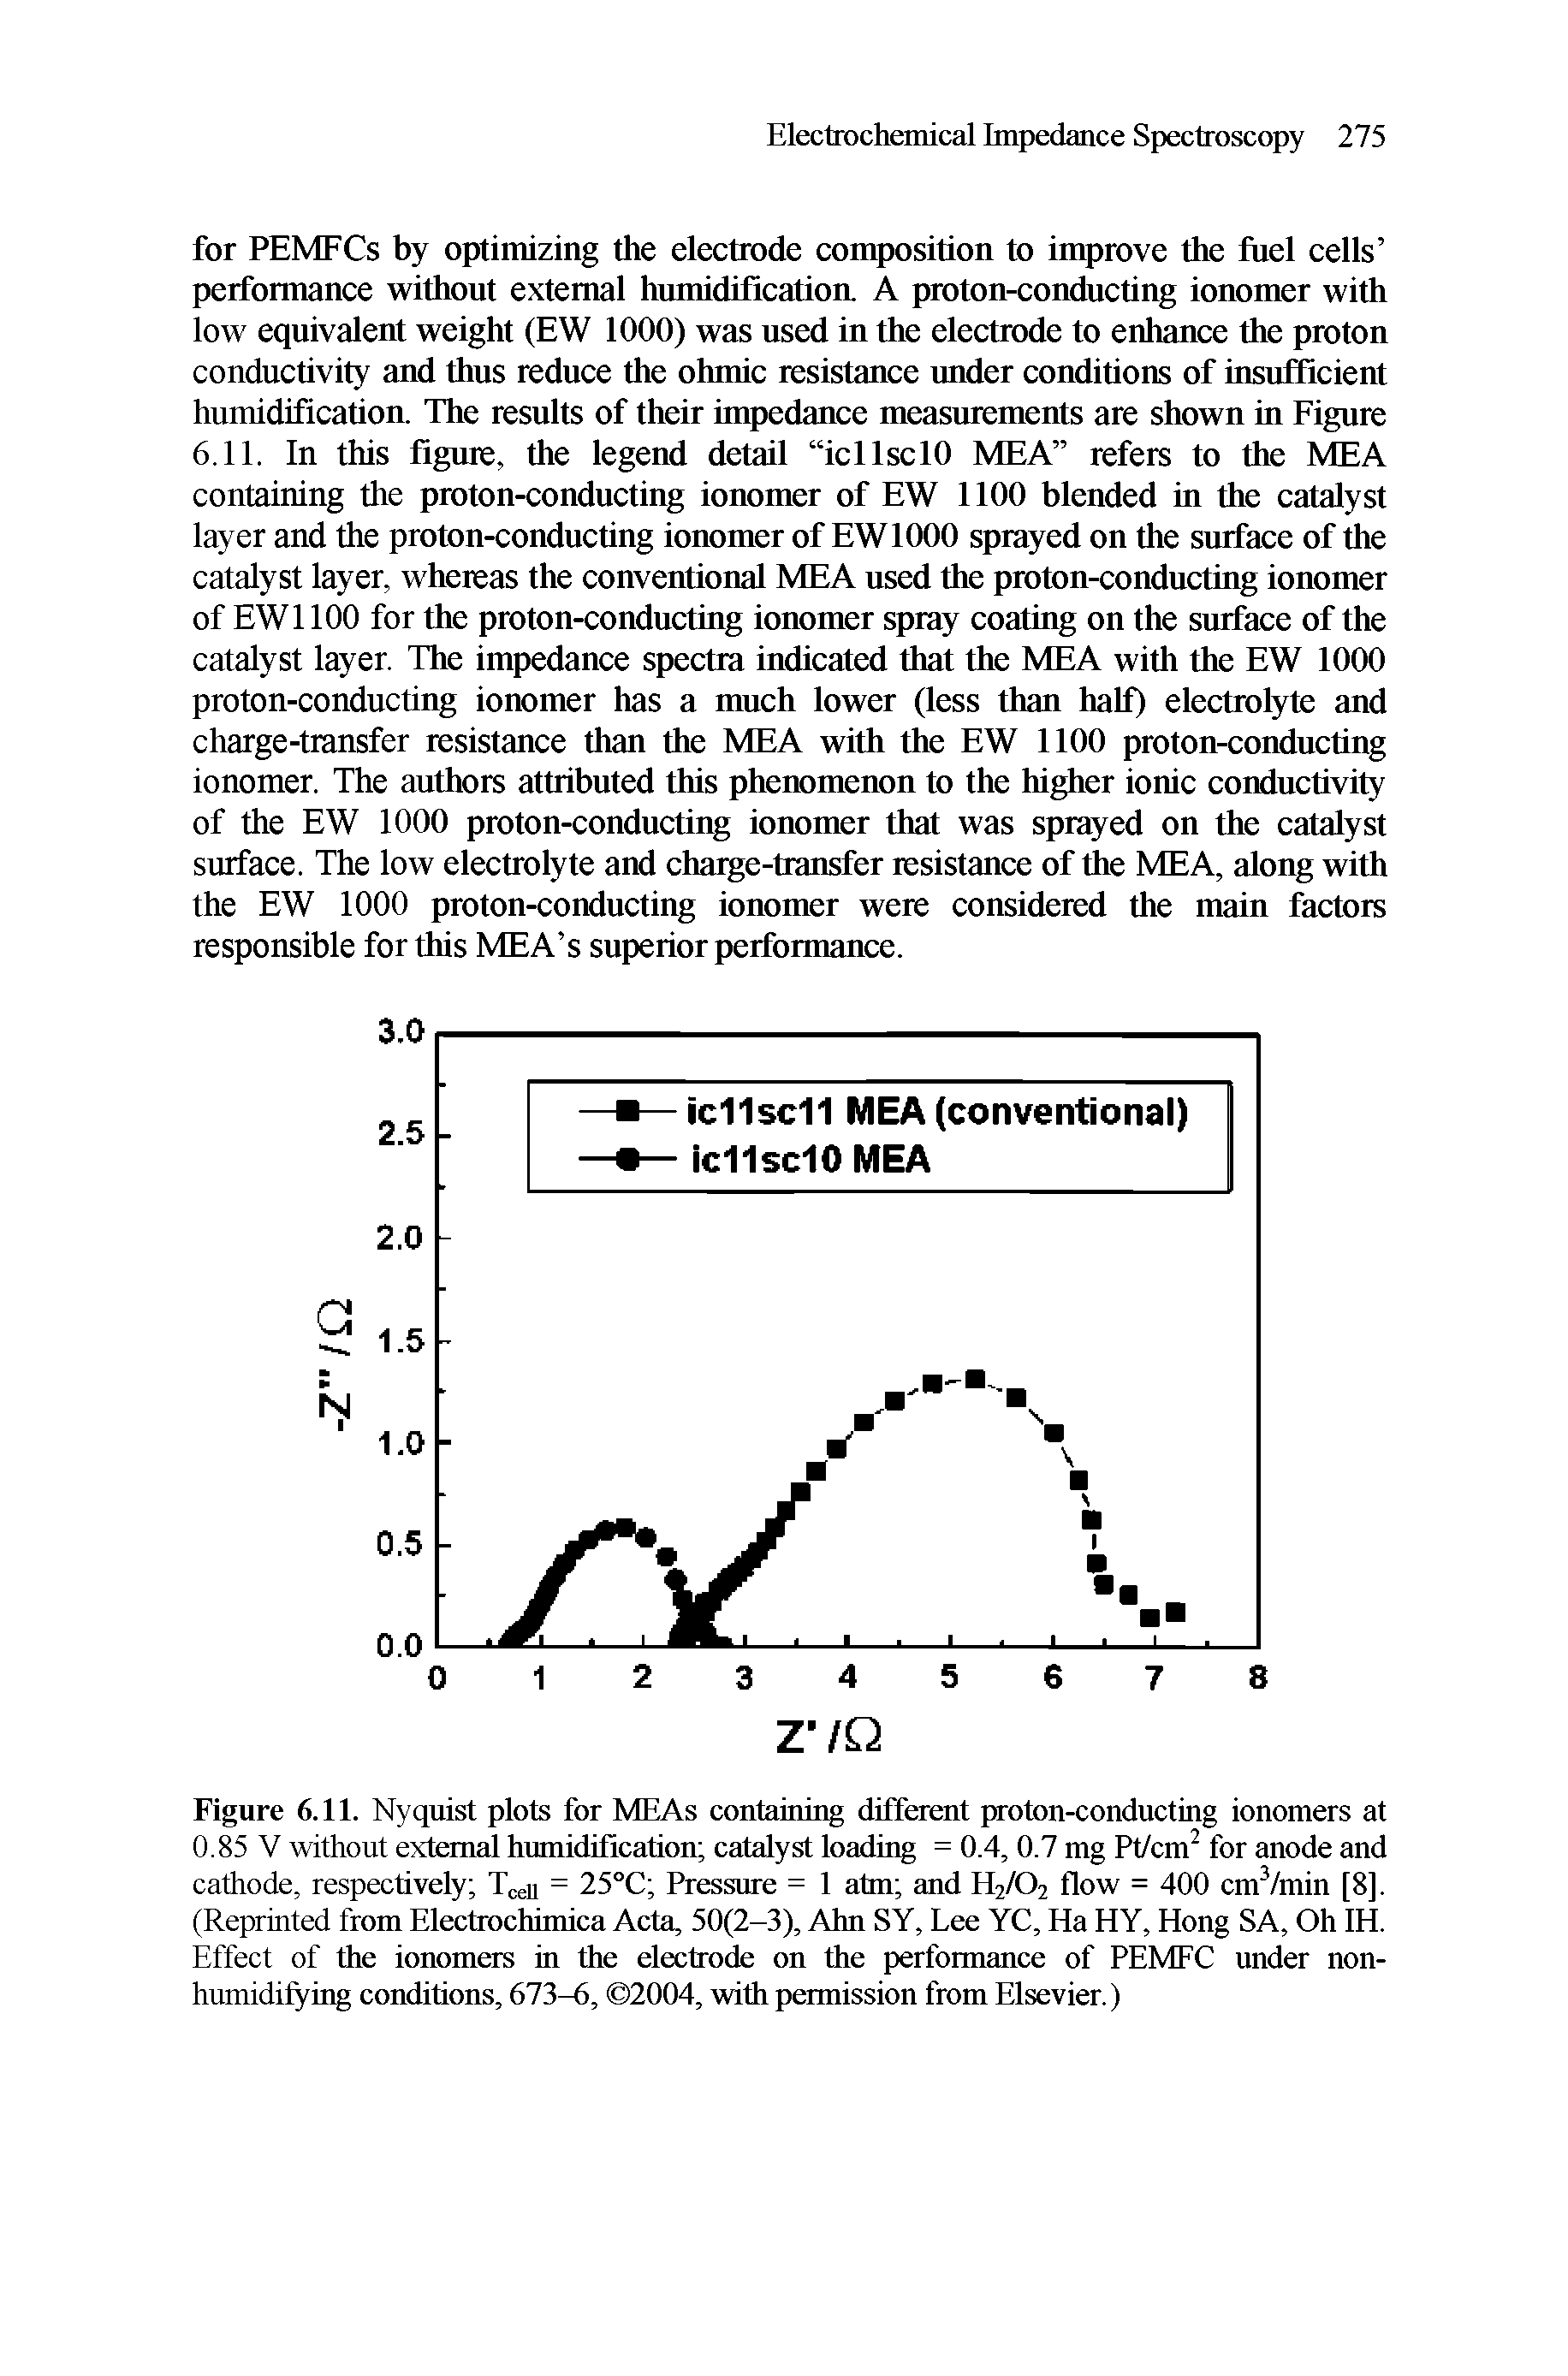 Figure 6.11. Nyquist plots for MEAs containing different proton-conducting ionomers at 0.85 V without external humidification catalyst loading = 0.4, 0.7 mg Pt/cm2 for anode and cathode, respectively TceU = 25°C Pressure = 1 atm and H2/02 flow = 400 cmVmin [8]. (Reprinted from Electrochimica Acta, 50(2-3), Ahn SY, Lee YC, Ha HY, Hong SA, Oh IH. Effect of the ionomers in the electrode on the performance of PEMFC under non-humidifying conditions, 673-6, 2004, with permission from Elsevier.)...